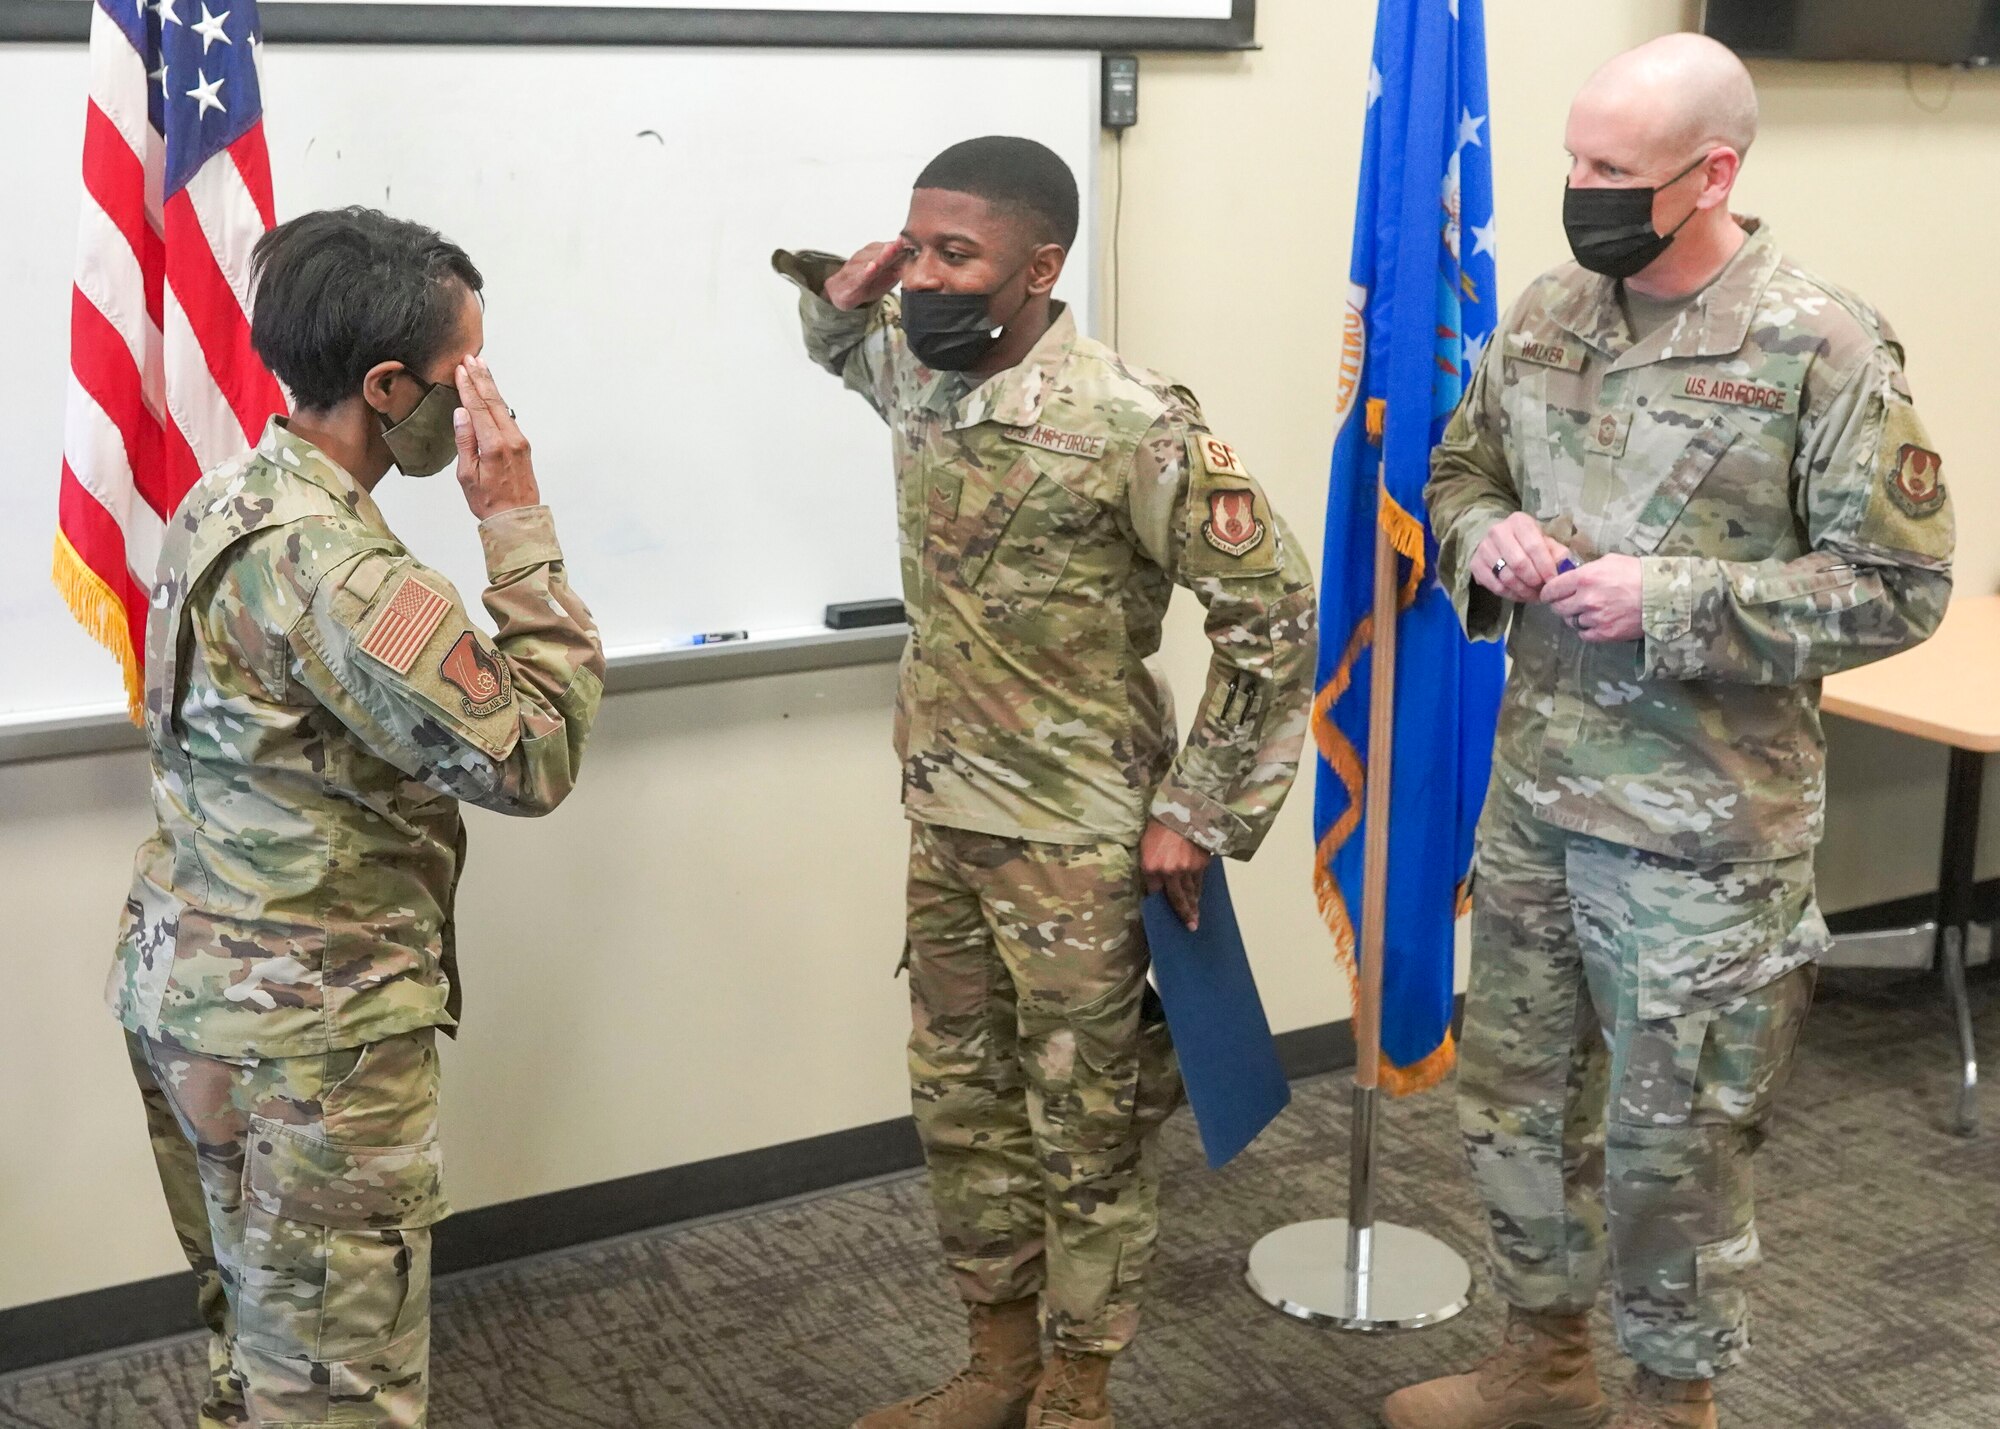 Airman First Class Kamari Johnson, a defender with the 75th Security Forces Squadron, salutes Col. Jenise Carroll, 75th Air Base Wing commander, after receiving his acceptance letter to the U.S. Air Force Academy Preparatory School as Chief Master Sgt. Christopher Walker, 75th ABW command chief, looks on March 18, 2021,